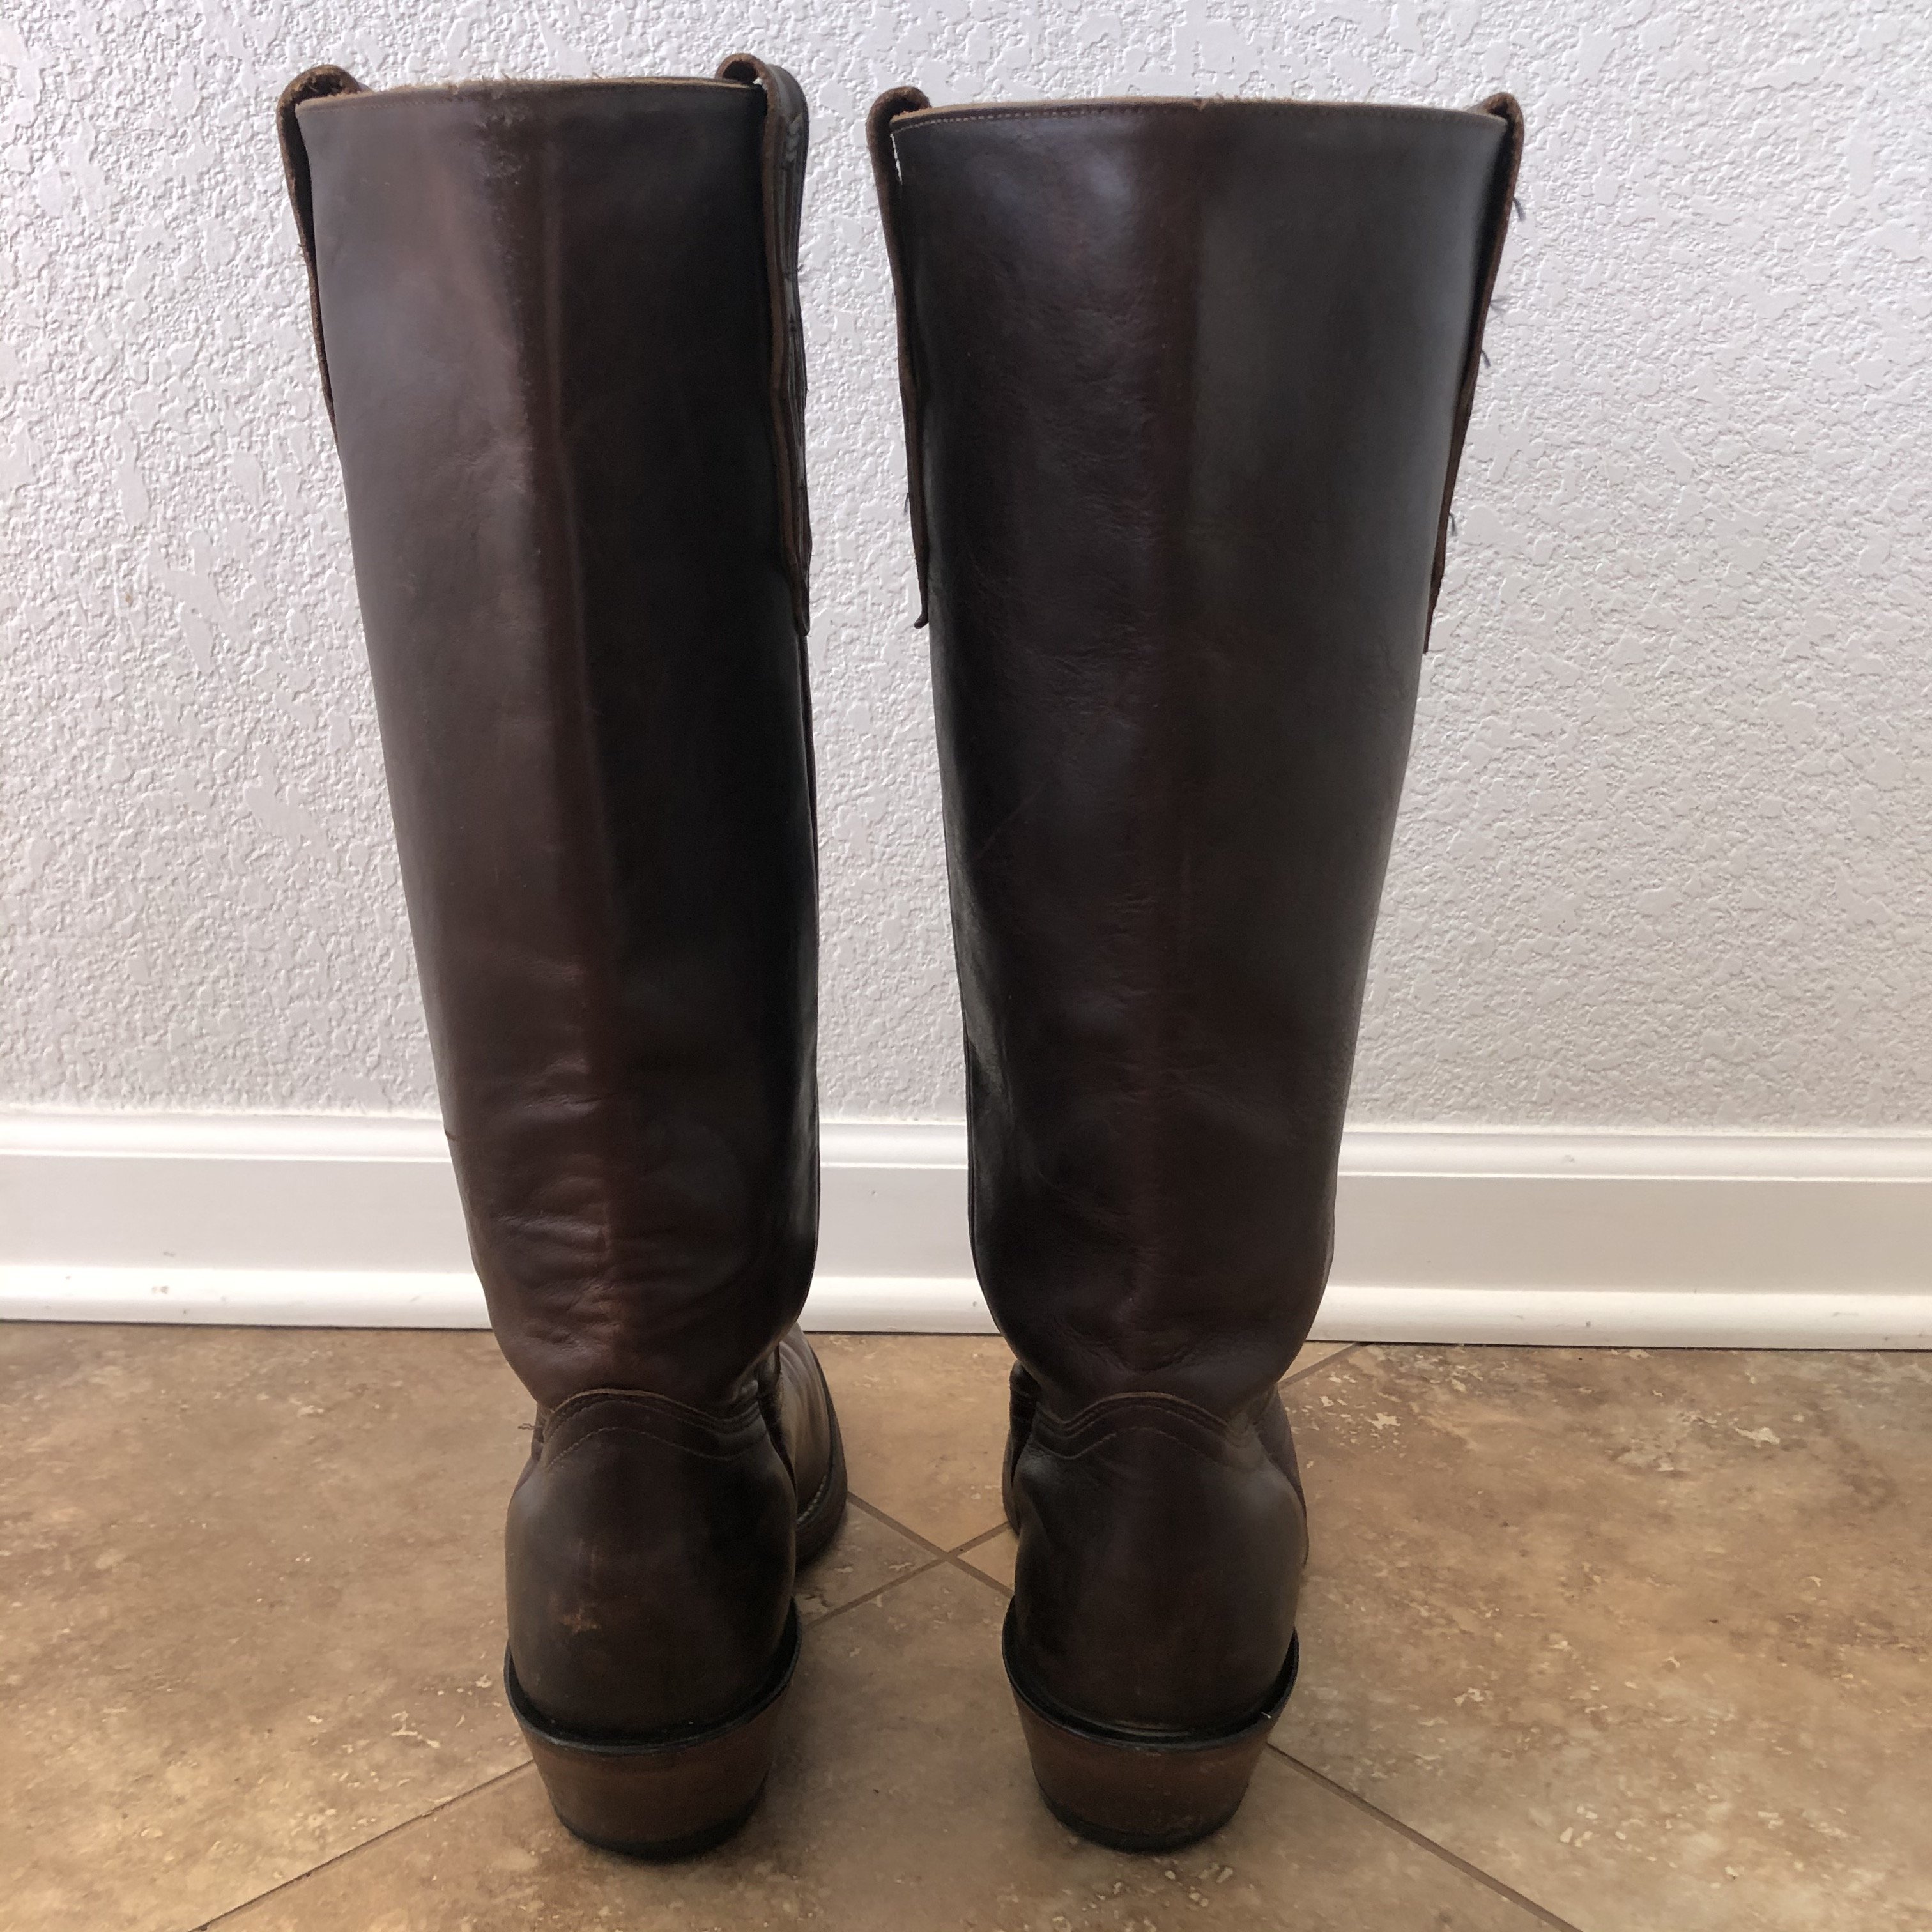 (FS) Boulet Boots - SASS Wire Classifieds - SASS Wire Forum